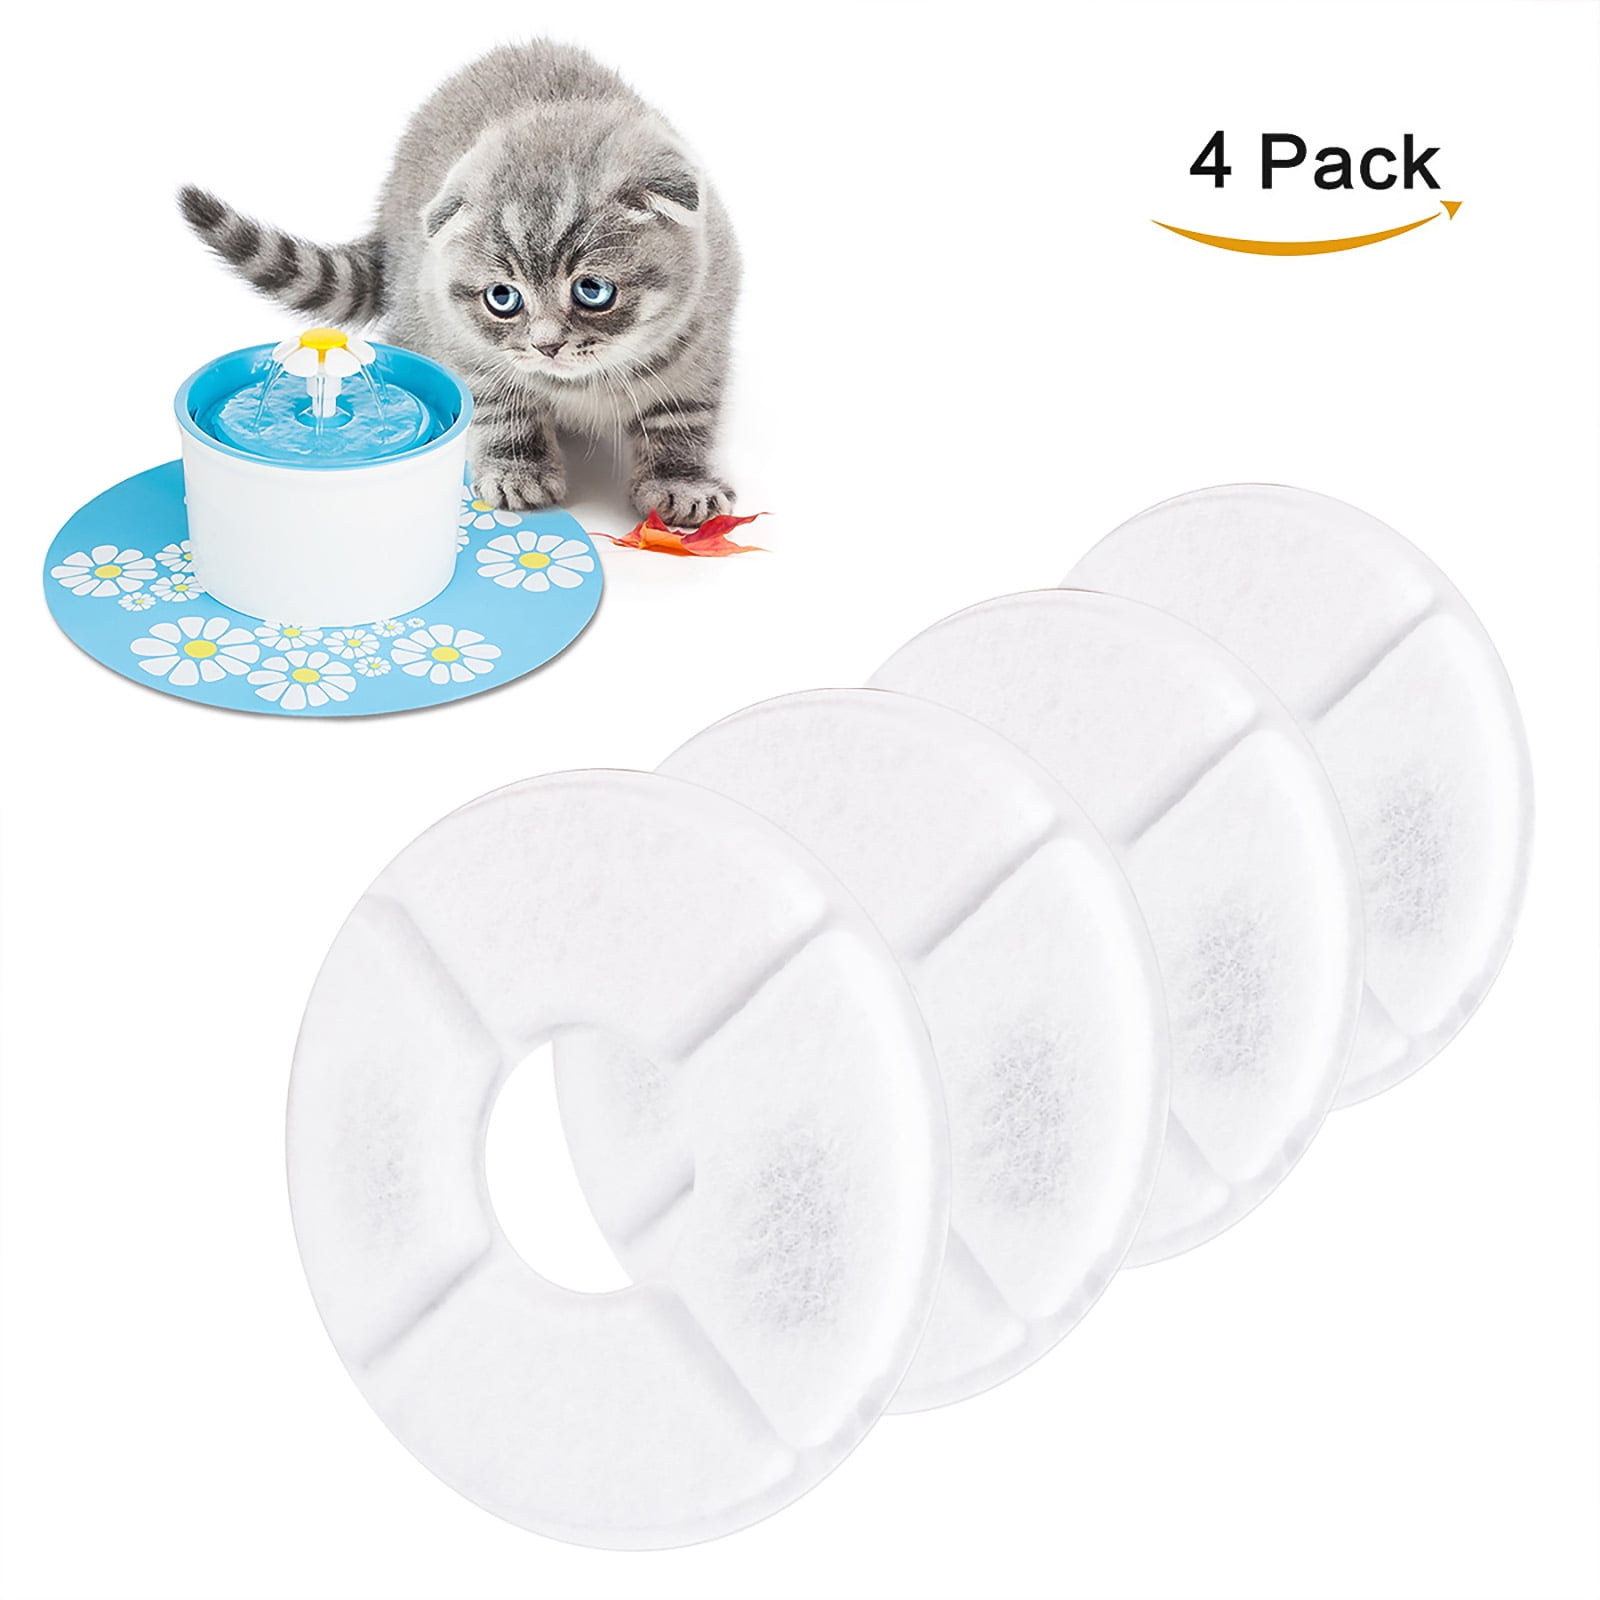 Pet Automatic Drinking Water Flower Dispenser Filters Replacement Best Fountain Filters for Dogs and Cats Activated Carbon Water Dispenser Filters 4 Pack Cat Water Fountain Filters